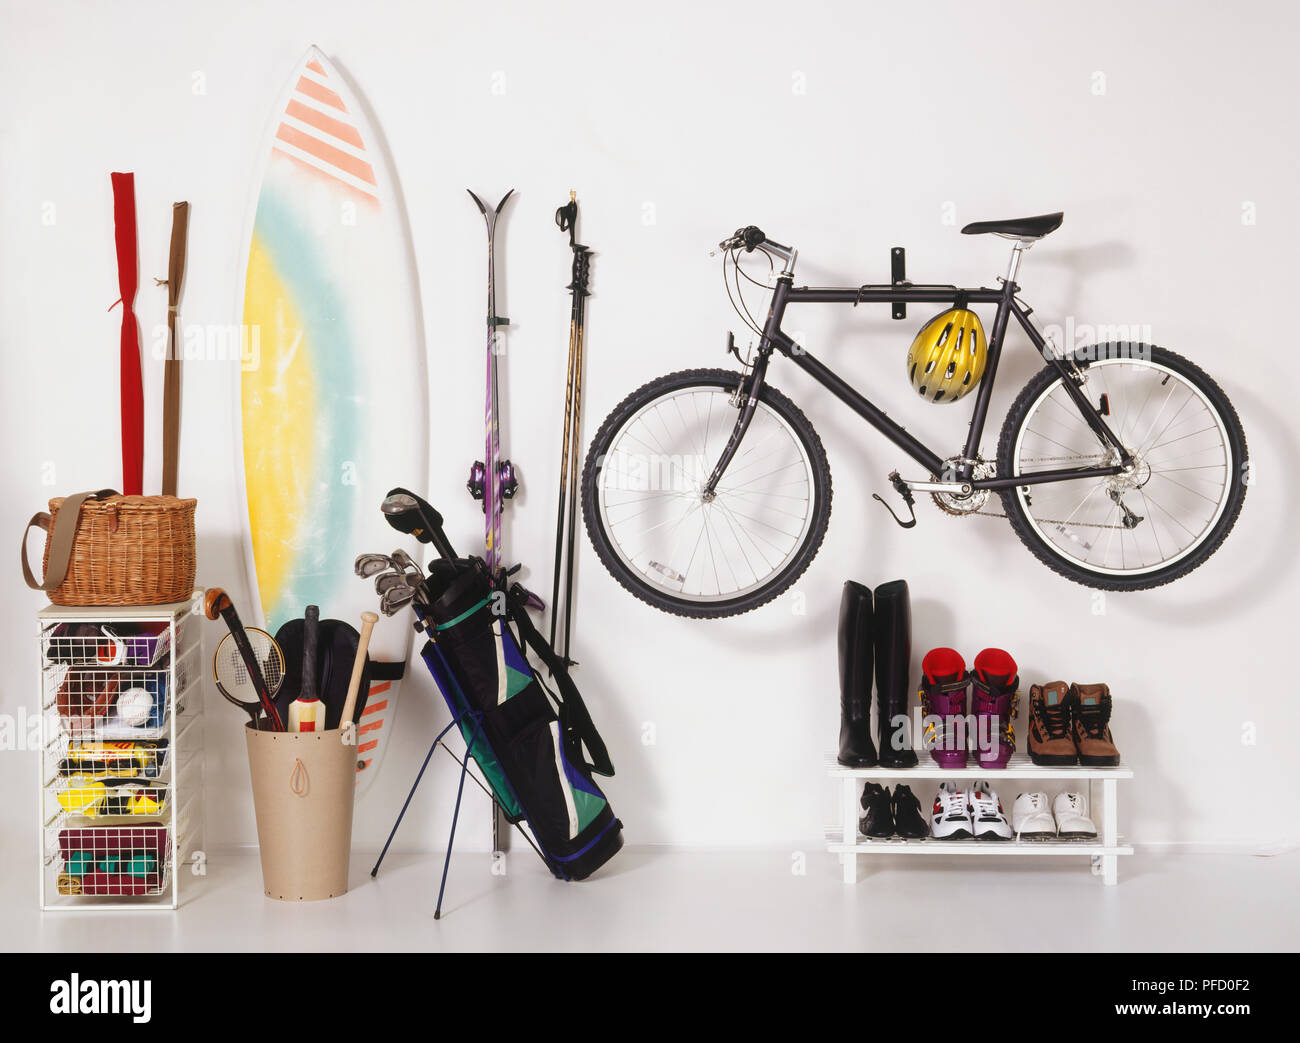 Bike fixed to wall, shoes stored on rack, skies and poles fixed on wall, golf clubs in caddy, surf board, hockey stick, front view. Stock Photo